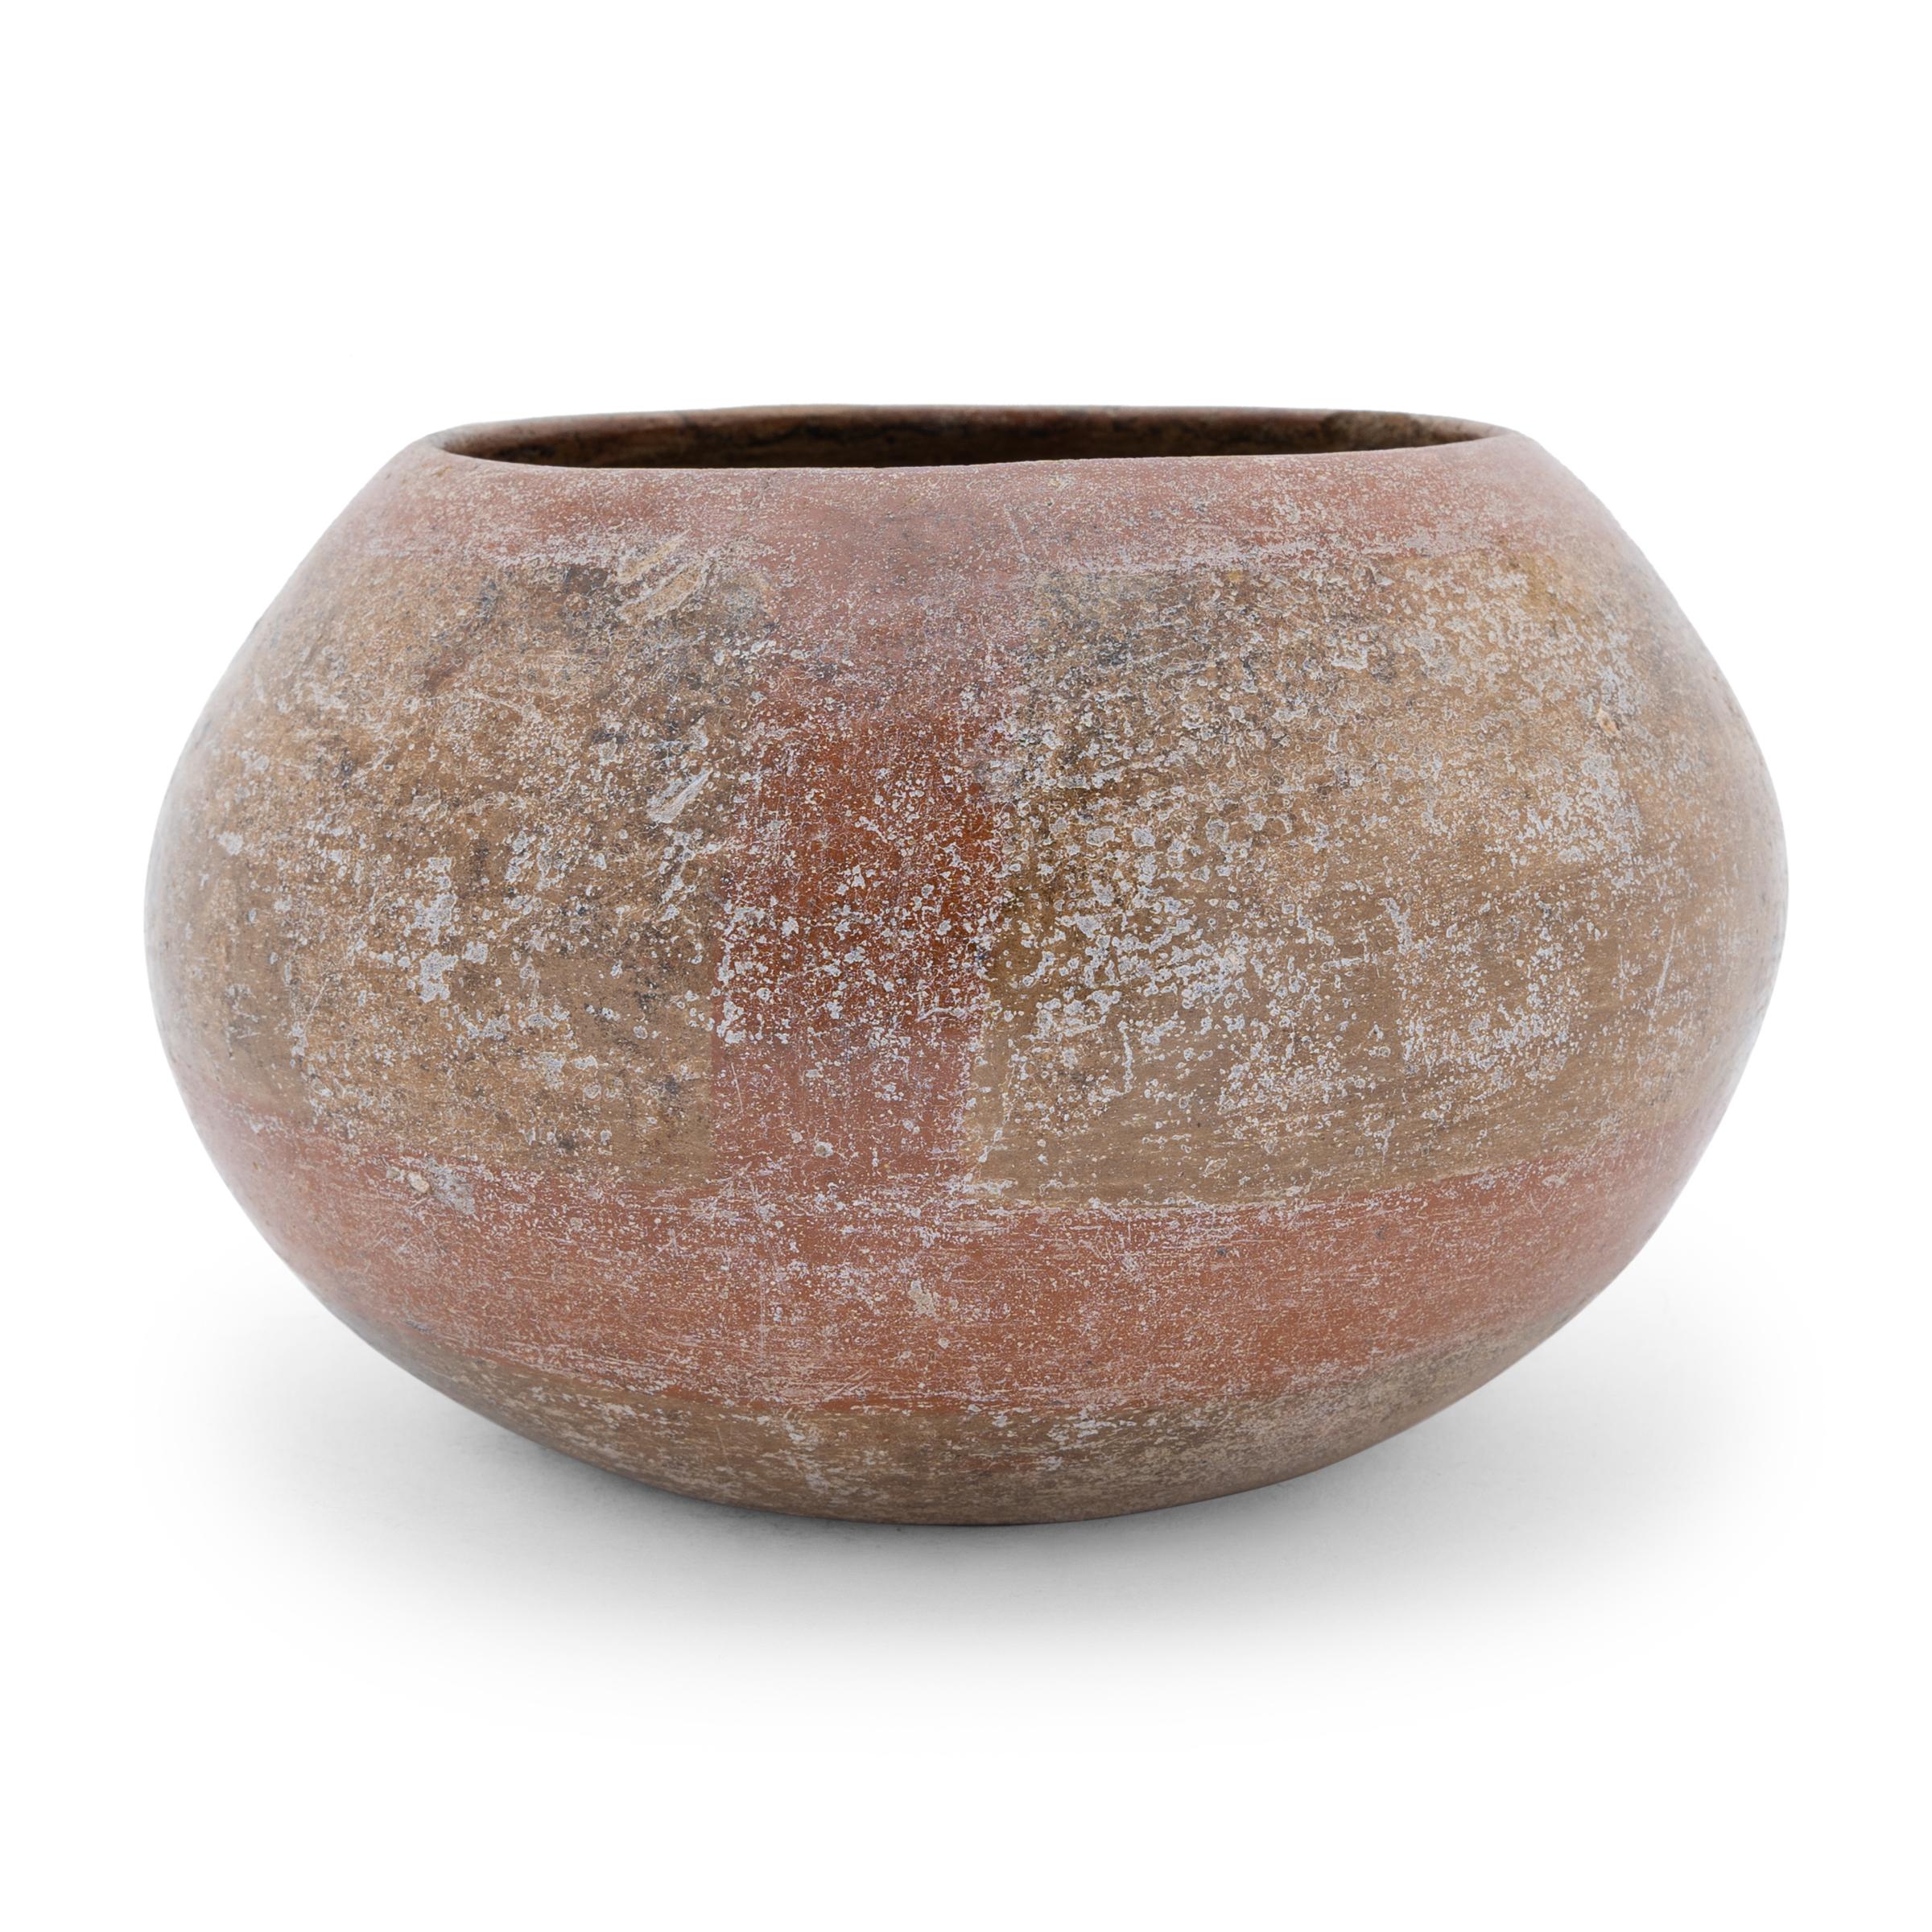 With a worn finish, this round orangeware bowl is a wonderful example of Pre-Columbian pottery. The delicate bowl has a squat form and tapered lip. Painted with stokes of red slip and speckled with white etching, this jar has an aged beauty. The